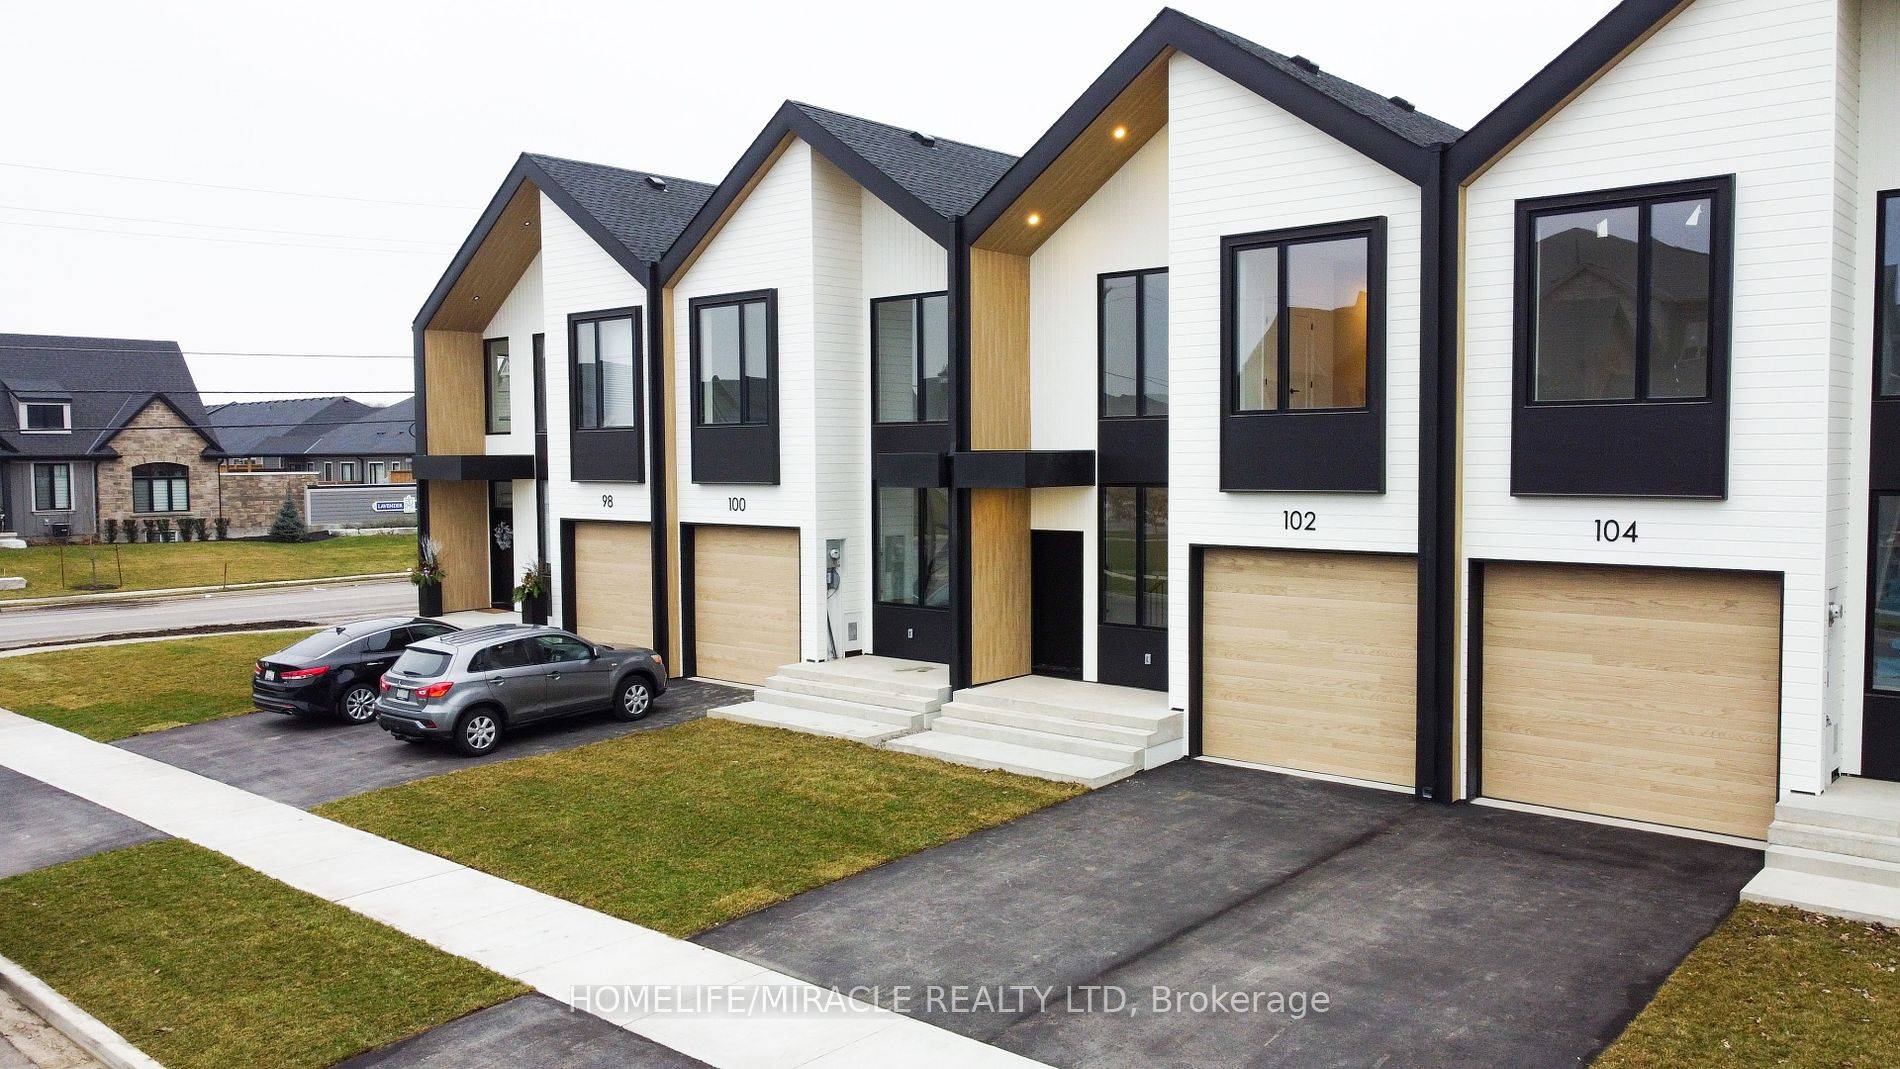 Welcome to this brand new never lived 3 bedrooms townhouse located in a brand new subdivision in the most desirable town of Fonthill.